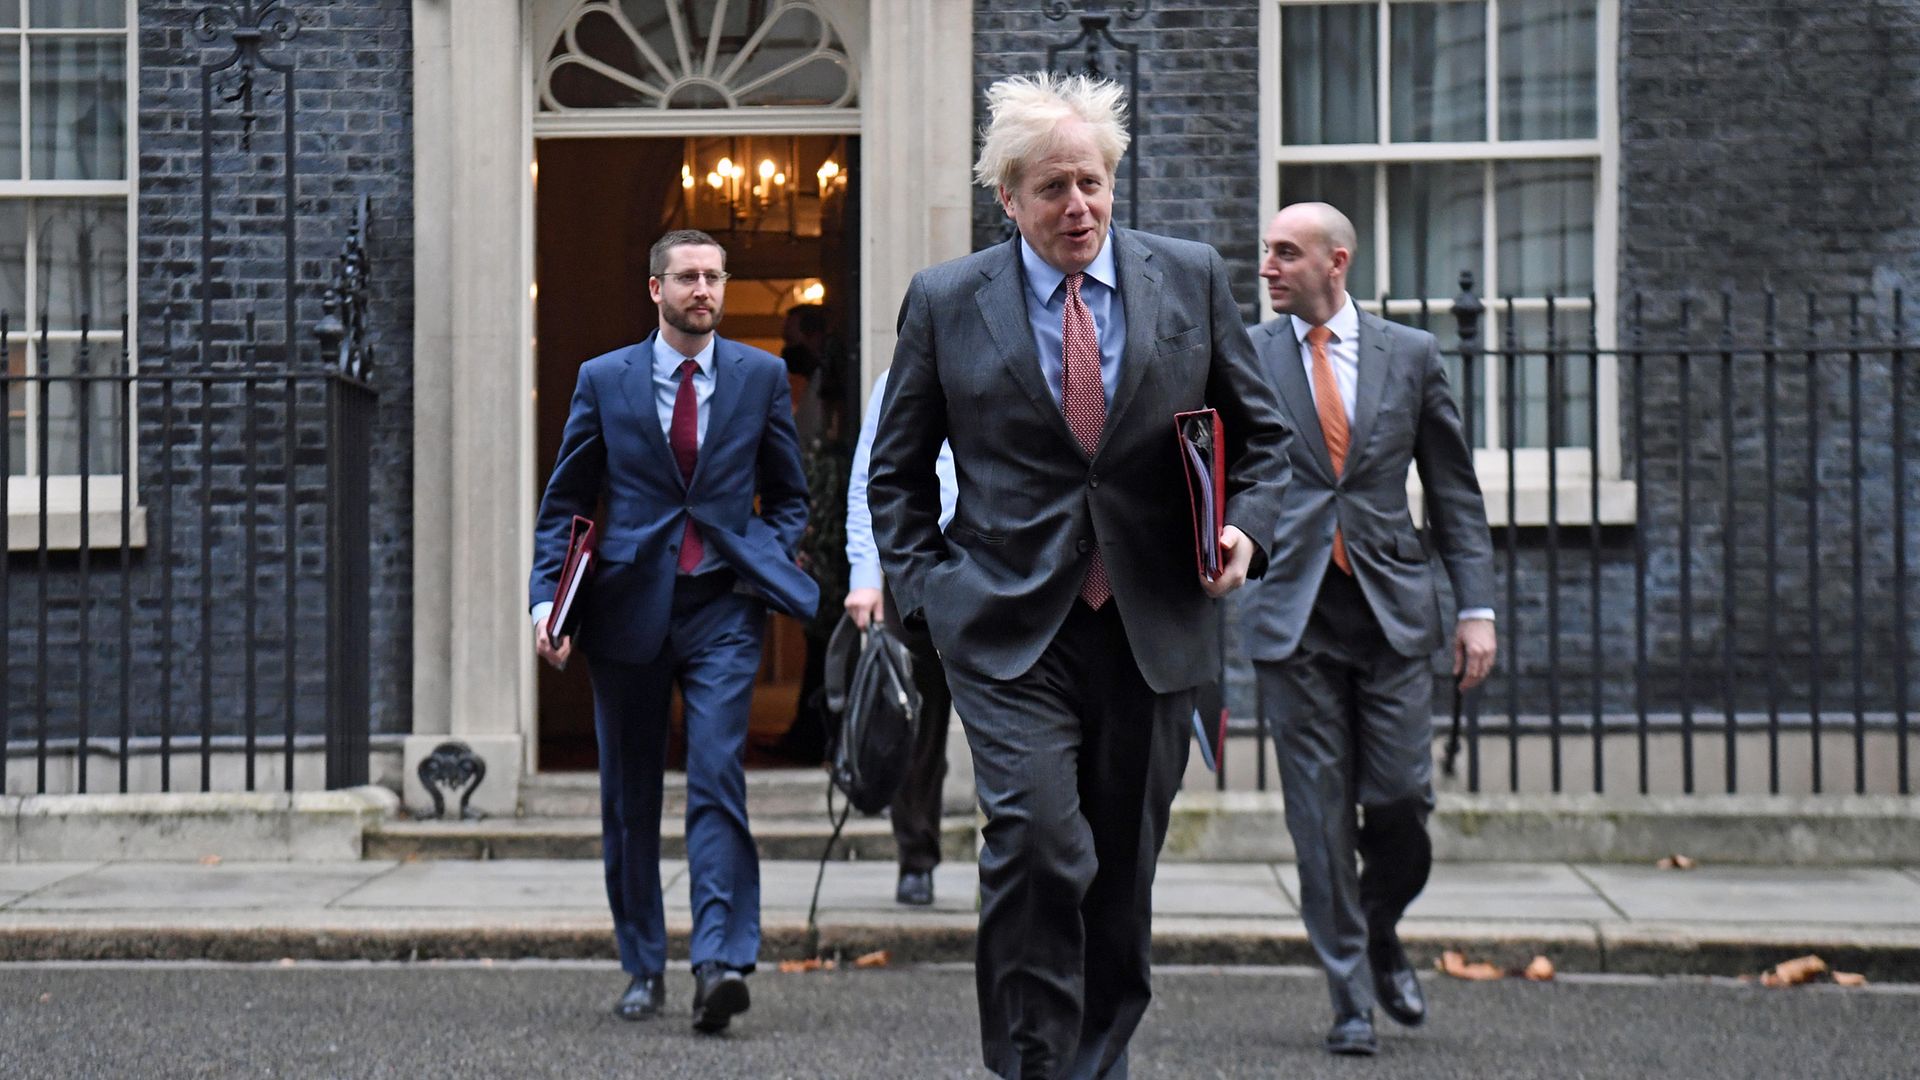 Prime Minister Boris Johnson leads colleagues including Cabinet Secretary Simon Case (left), across Downing Street as they arrive for the government's weekly Cabinet meeting at the Foreign and Commonwealth Office (FCO). - Credit: PA